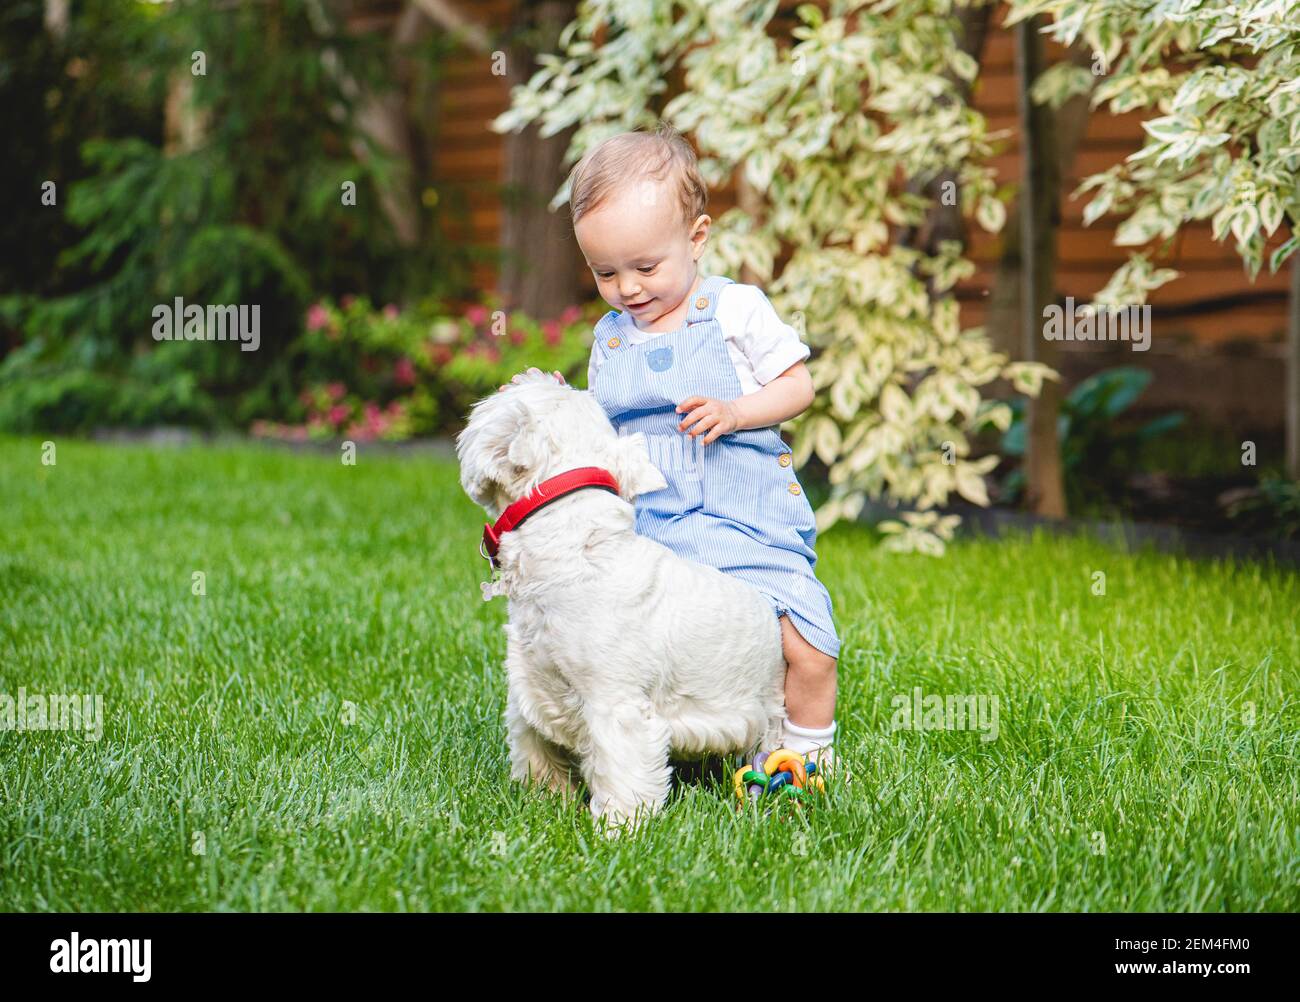 Small toddler girl playing and romping with puppy dog on green grass of backyard lawn on summer day Stock Photo